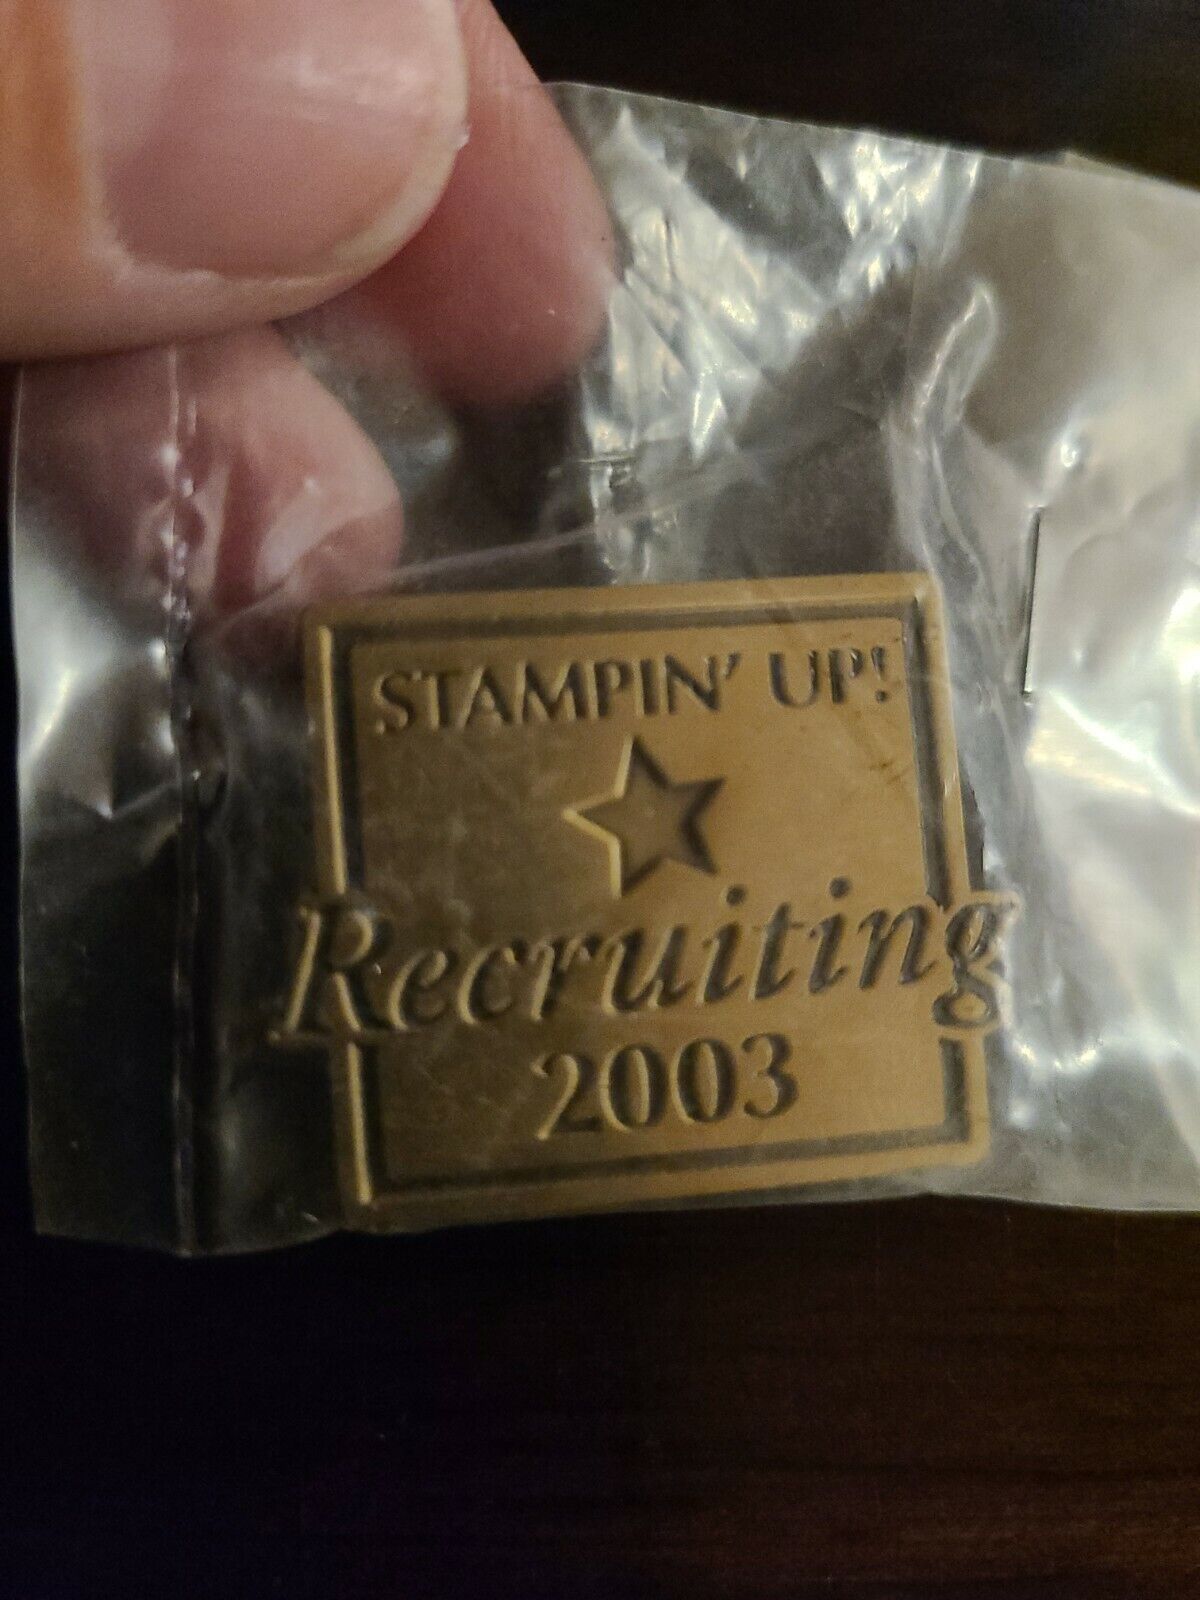 STAMPIN\' Up Up 2003 Recruiting one star Lapel Pin Gold Tone Enamel Collectible